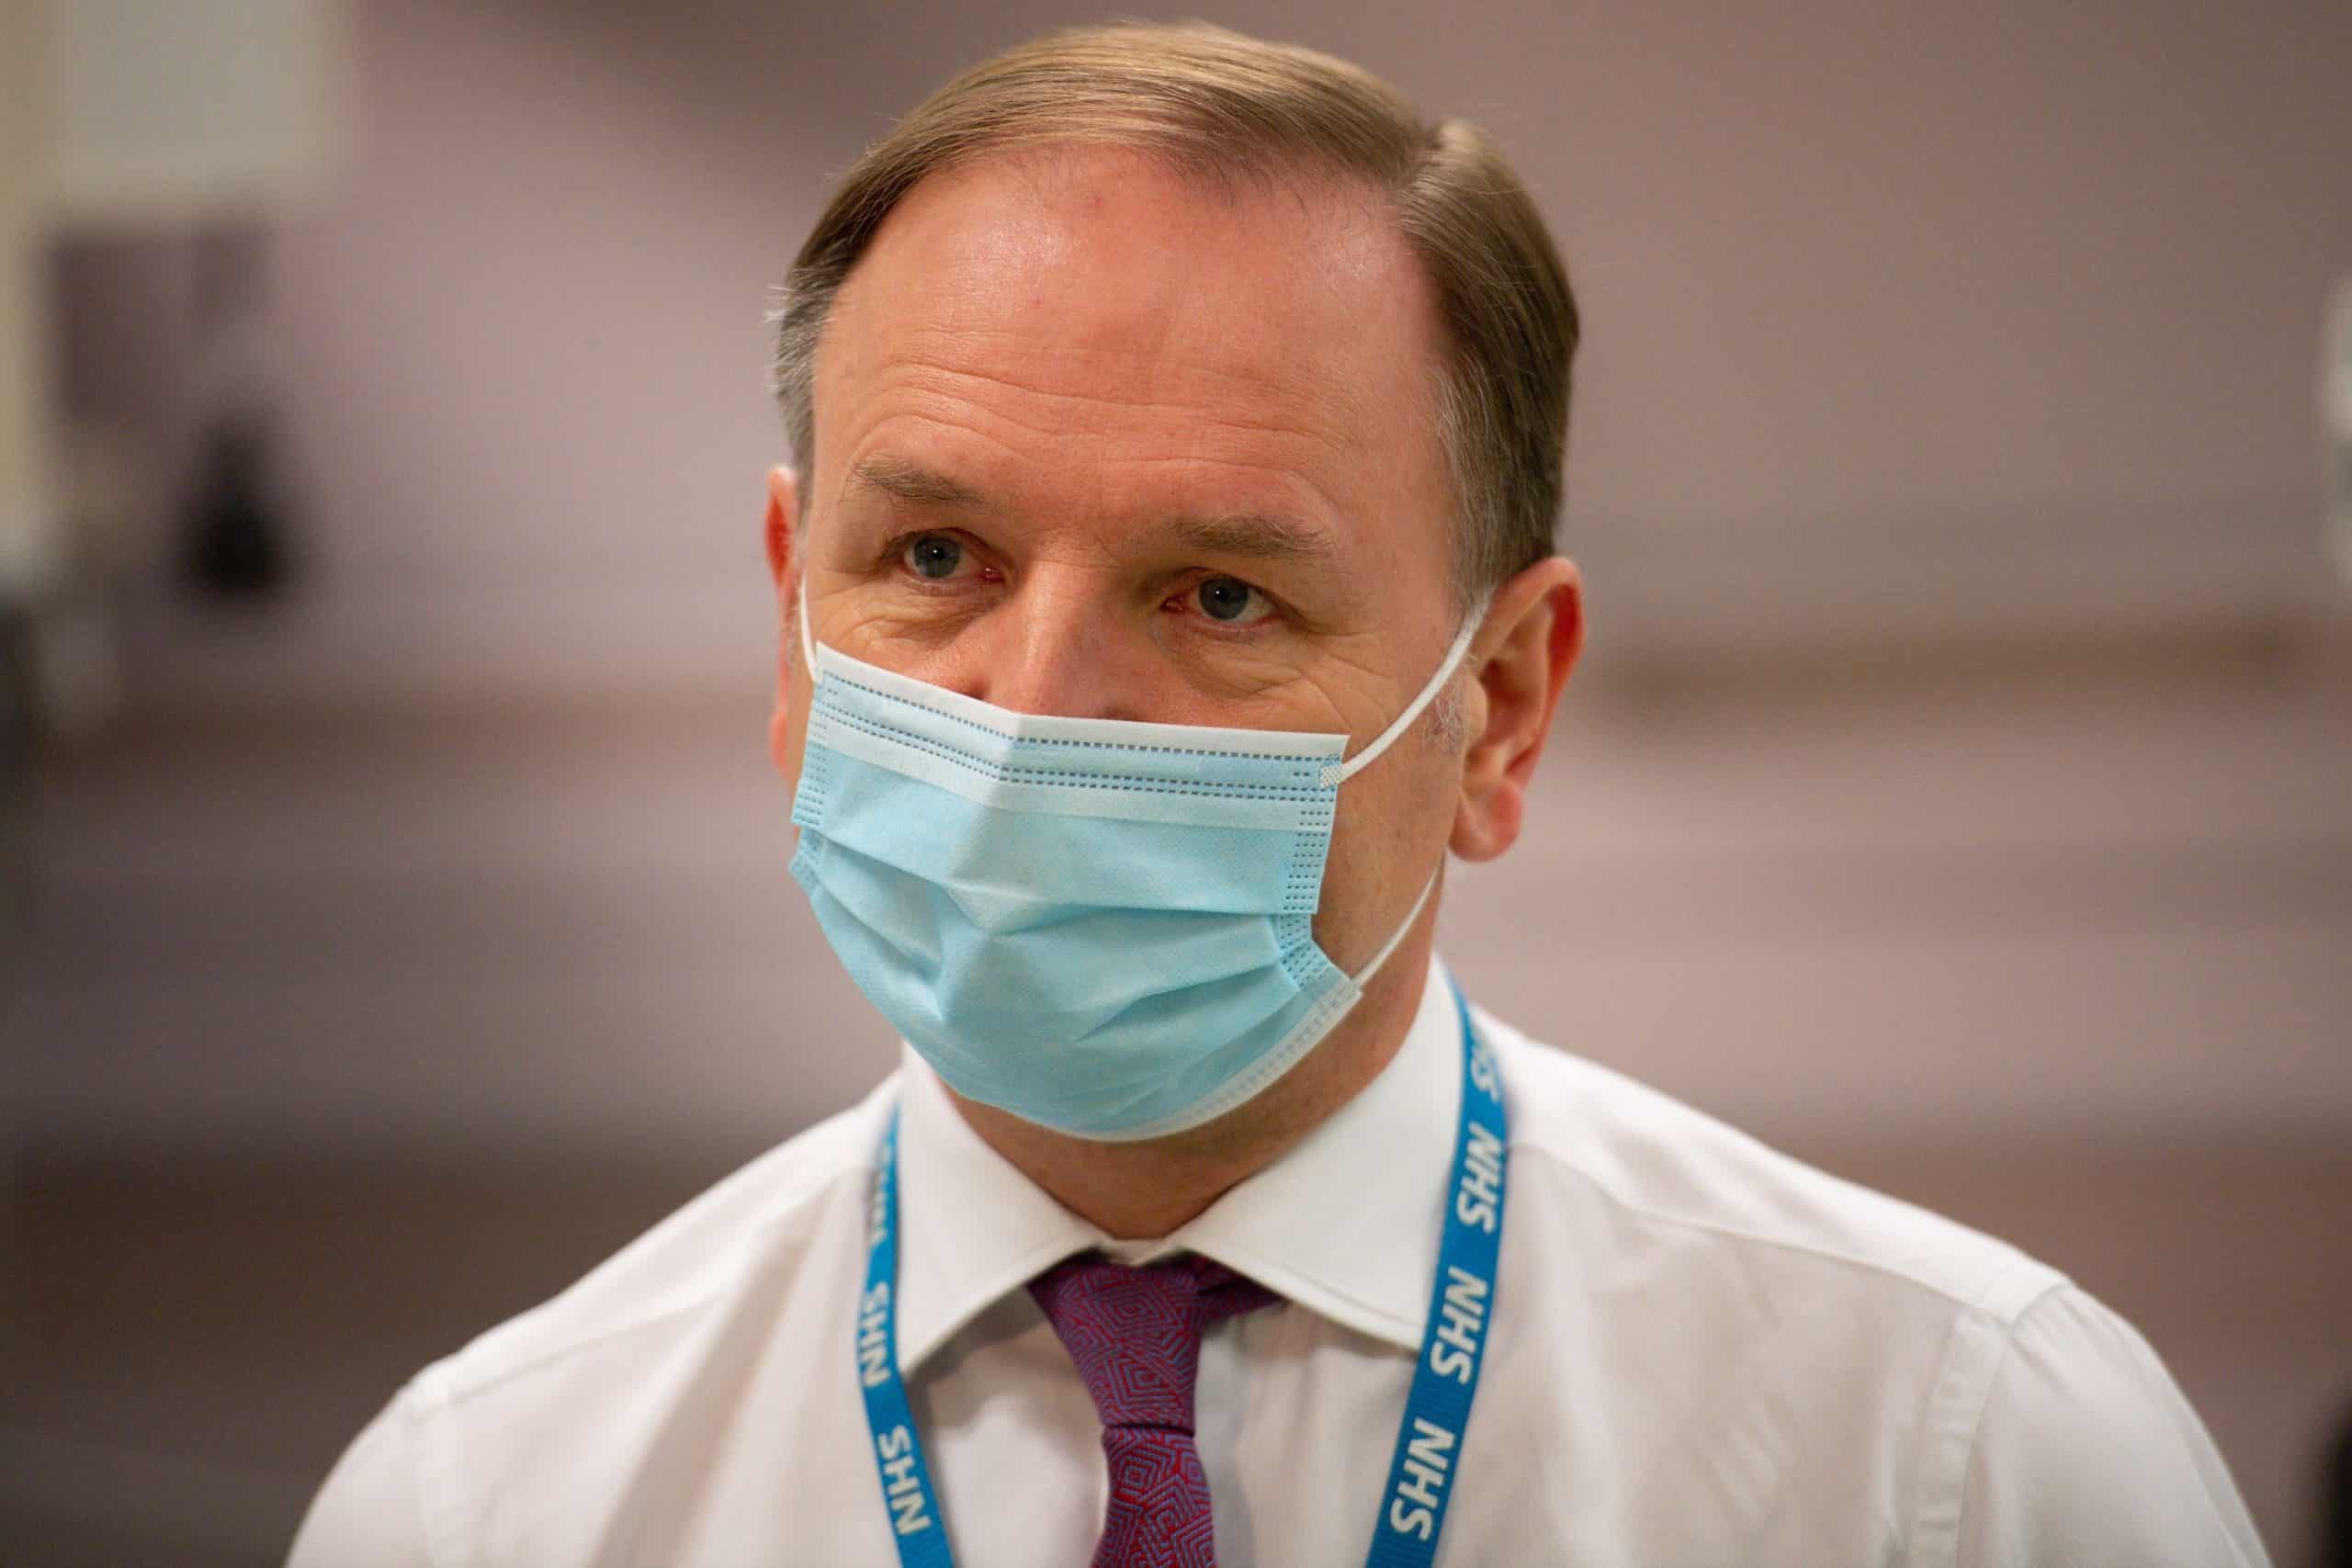 NHS boss refuses to back Hancock in excruciating clip